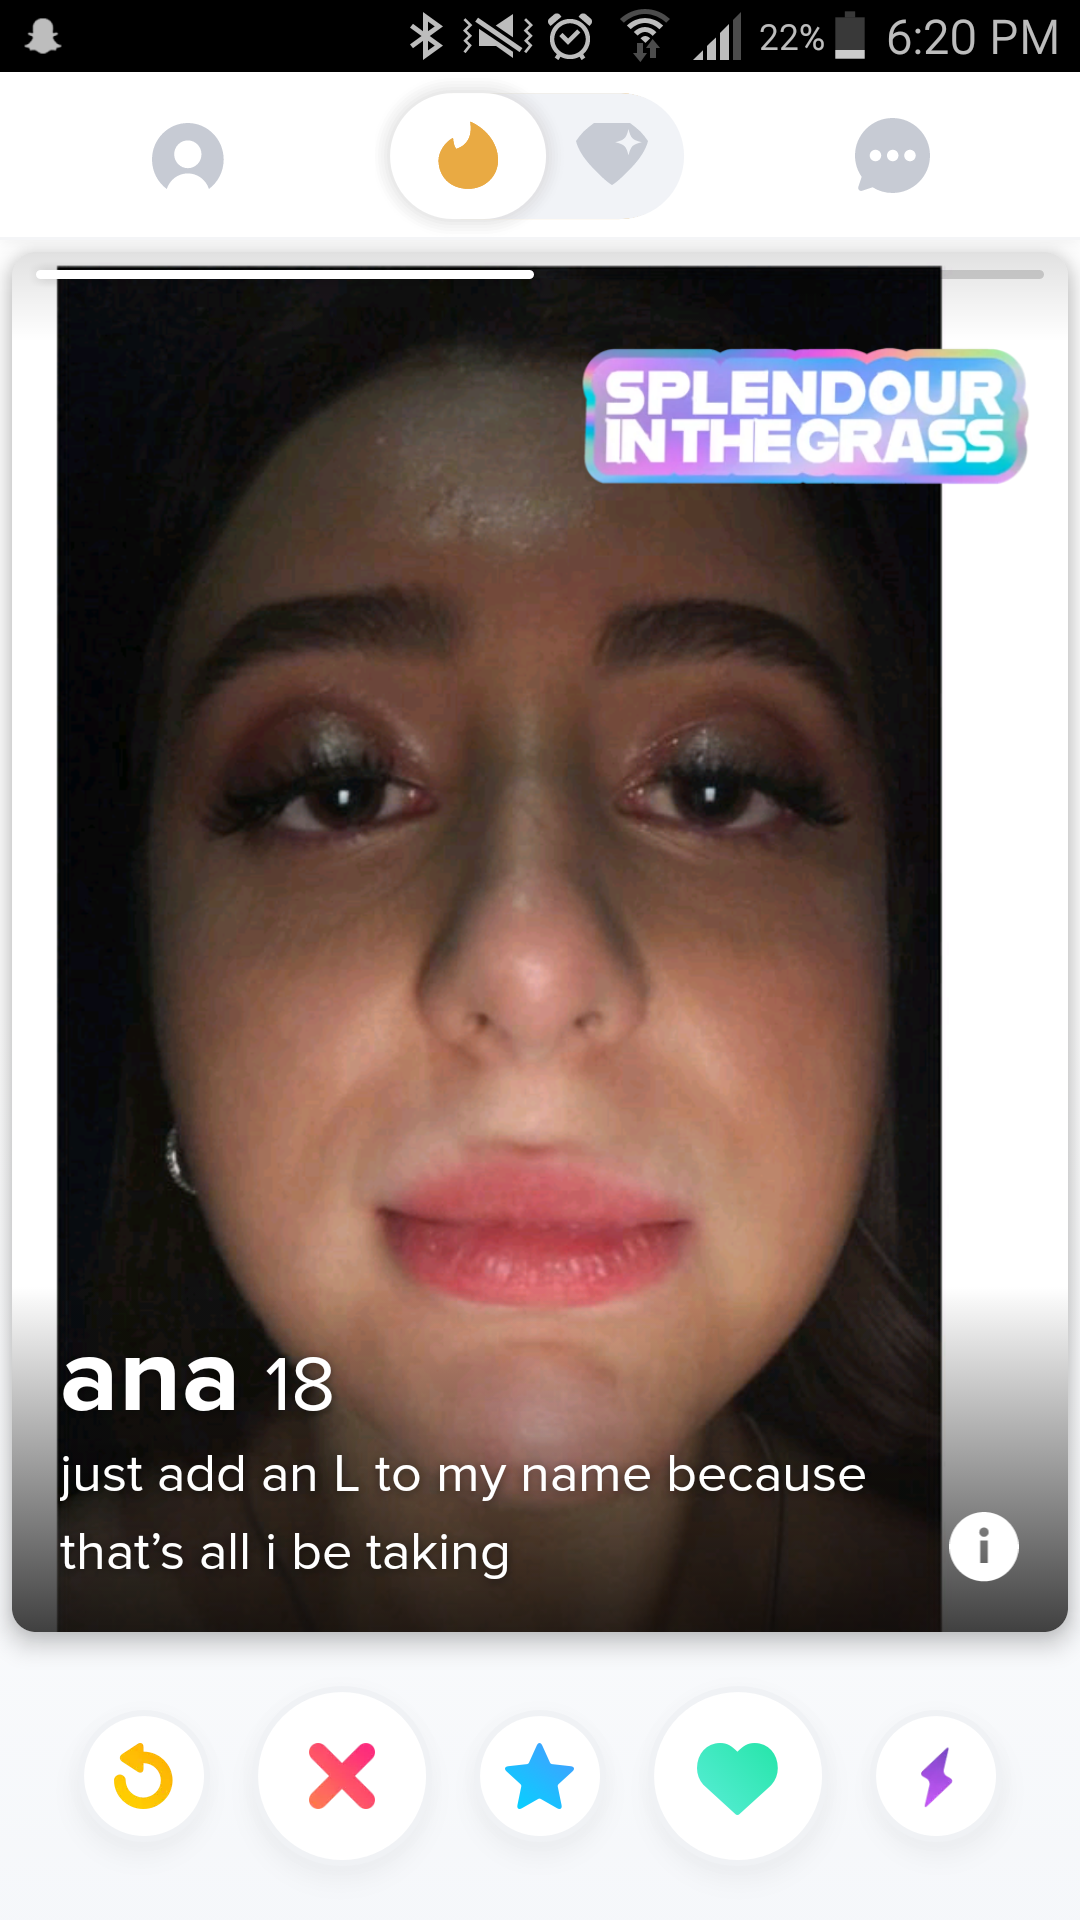 shameless tinder - ana 18 just add an L to my name because that's all i be taking